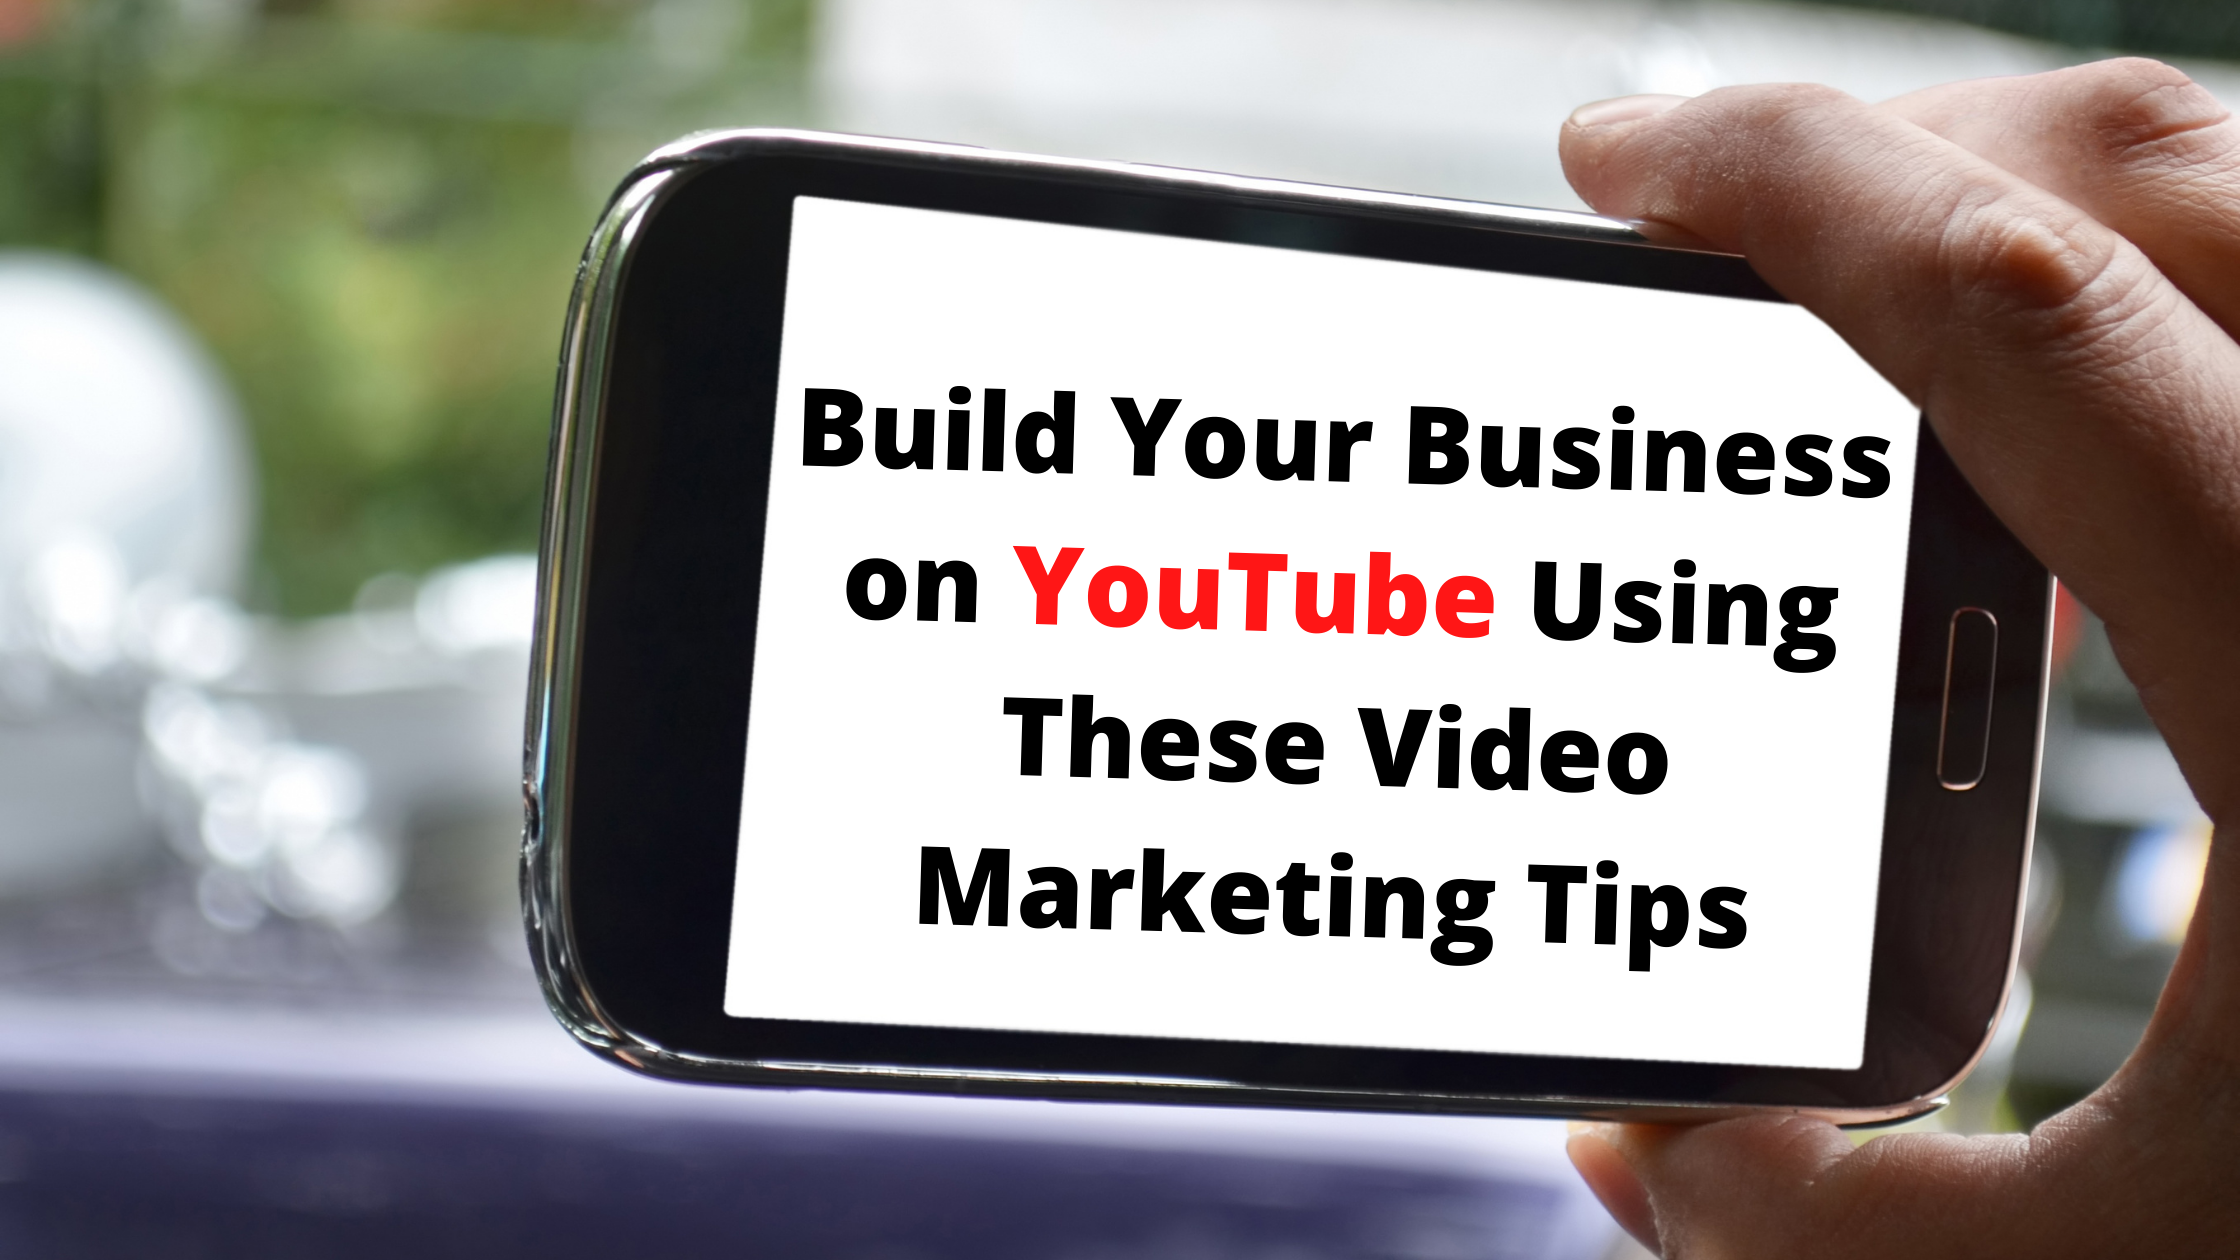 Build Your Business on YouTube Using These Video Marketing Tips